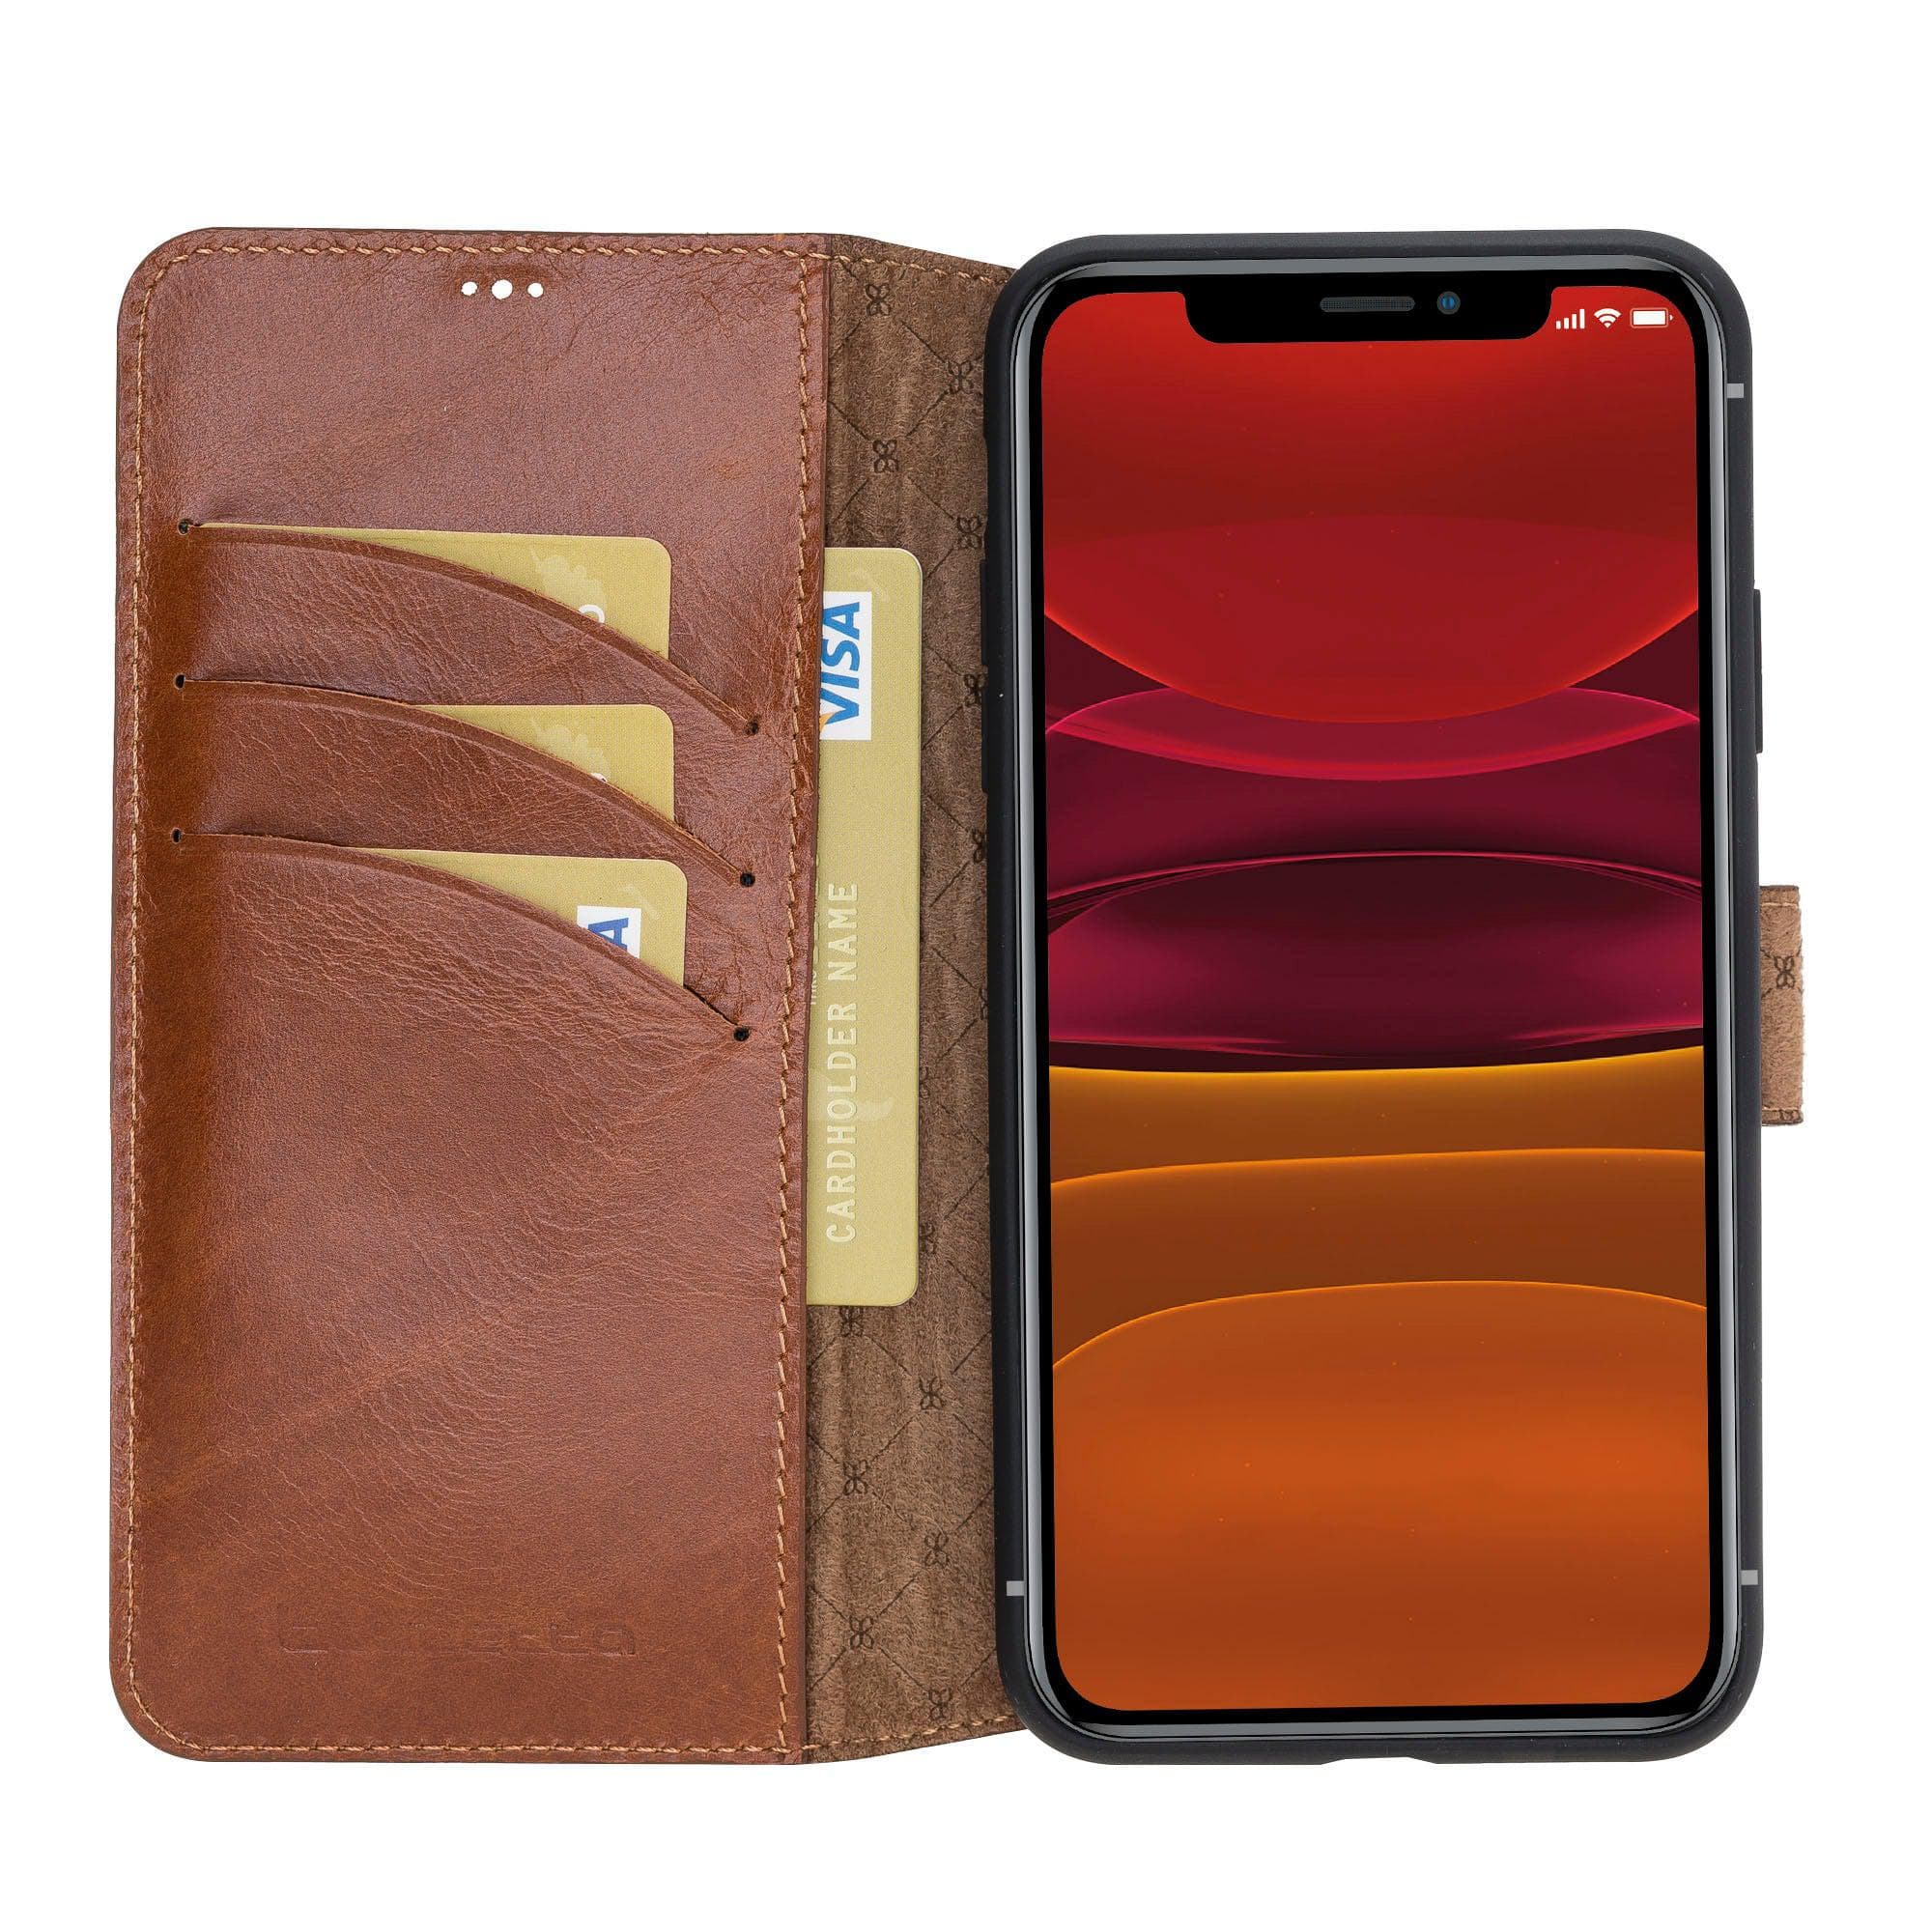 Wallet Folio with ID Slot Leather Wallet Case For Apple iPhone 11 Series İPhone 11 Promax / Tan Bouletta LTD